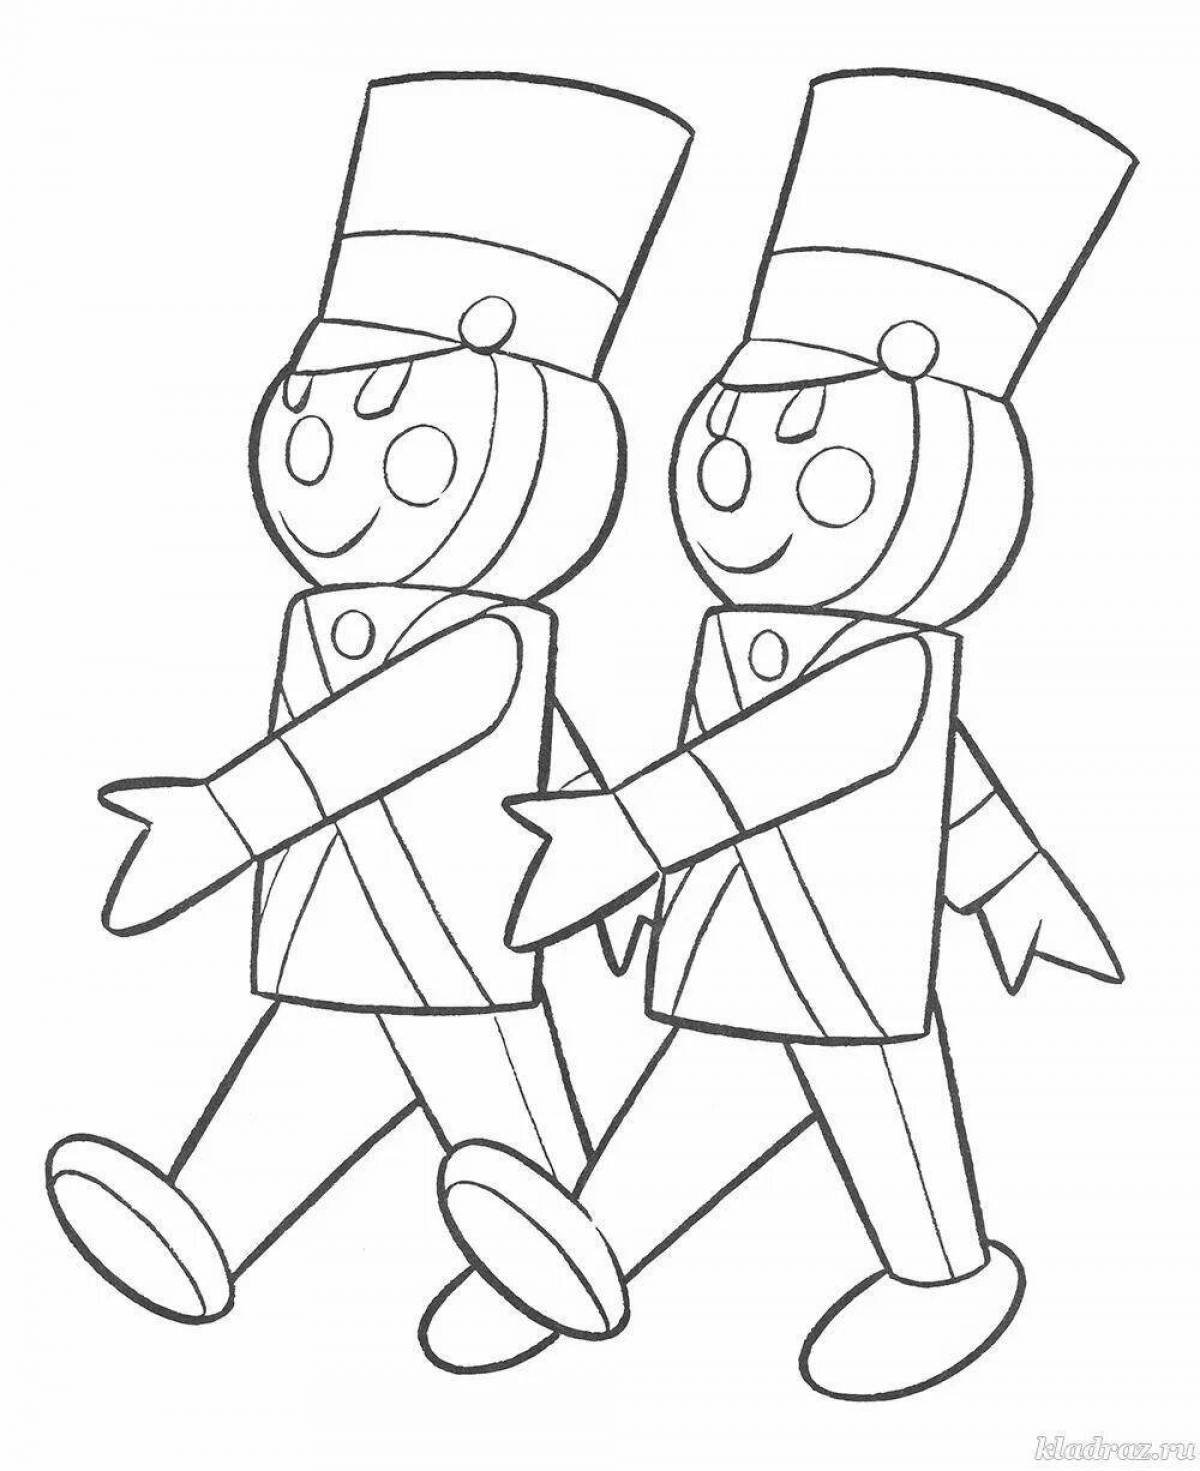 Elegant tin soldier coloring pages